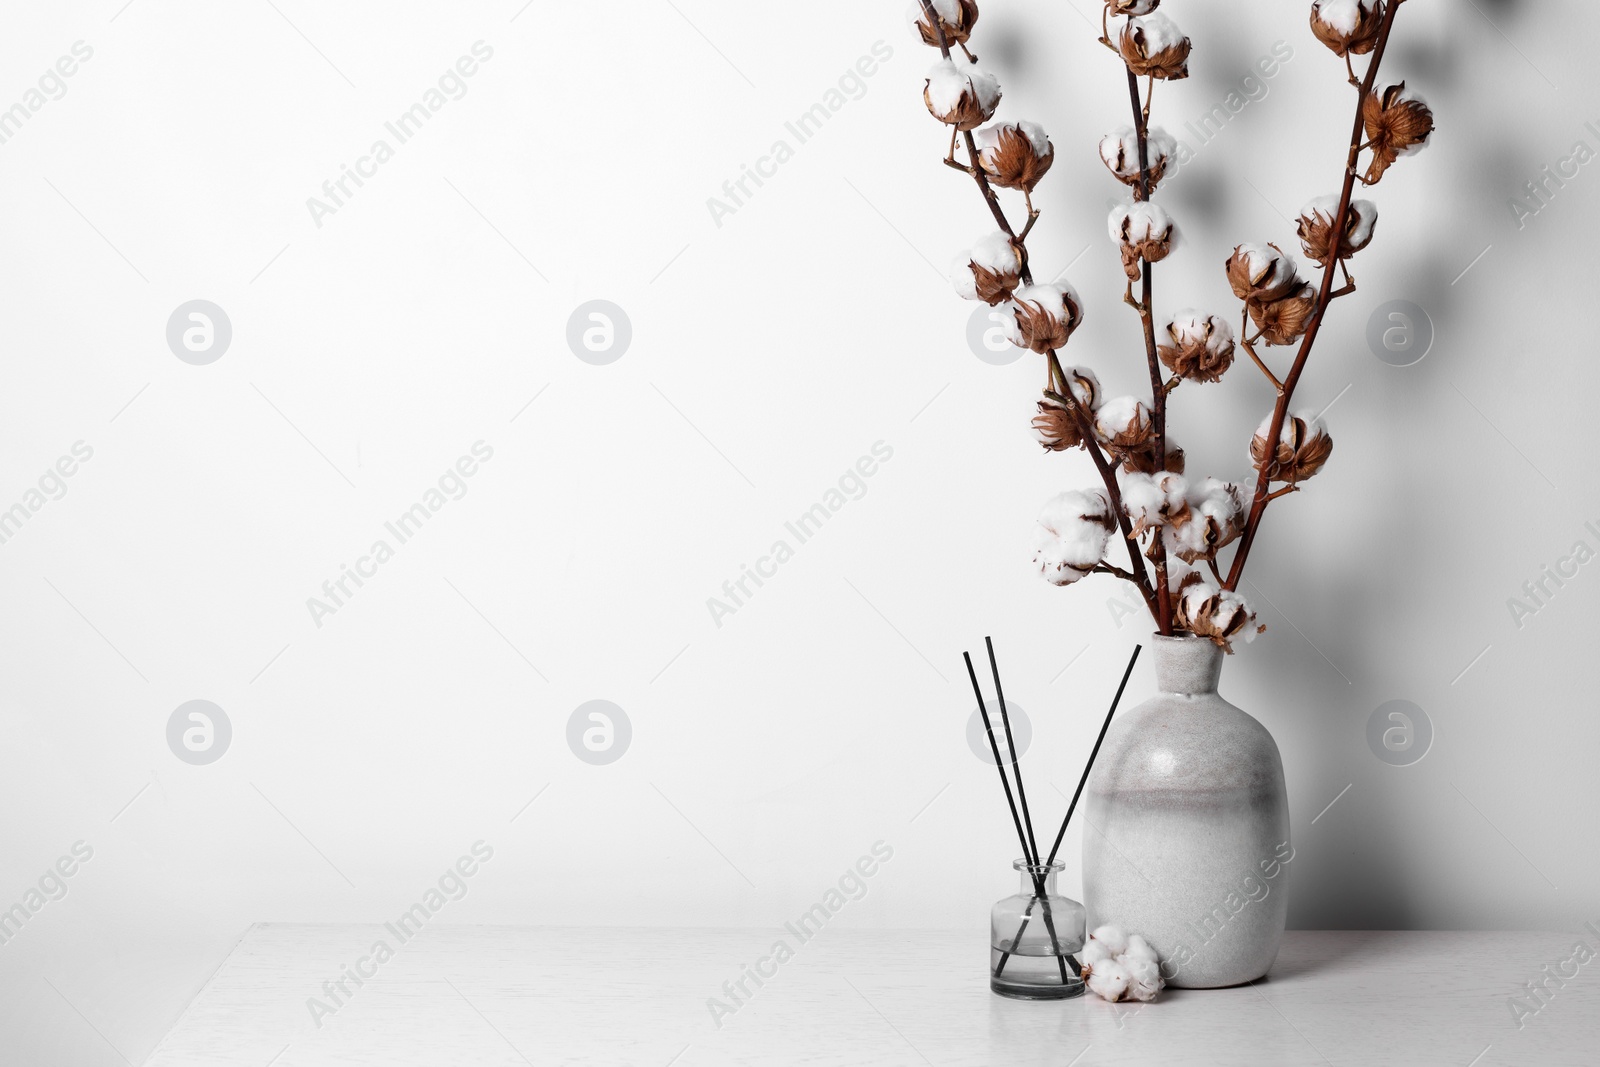 Photo of Reed diffuser and vase with cotton branches on table against white background. Space for text